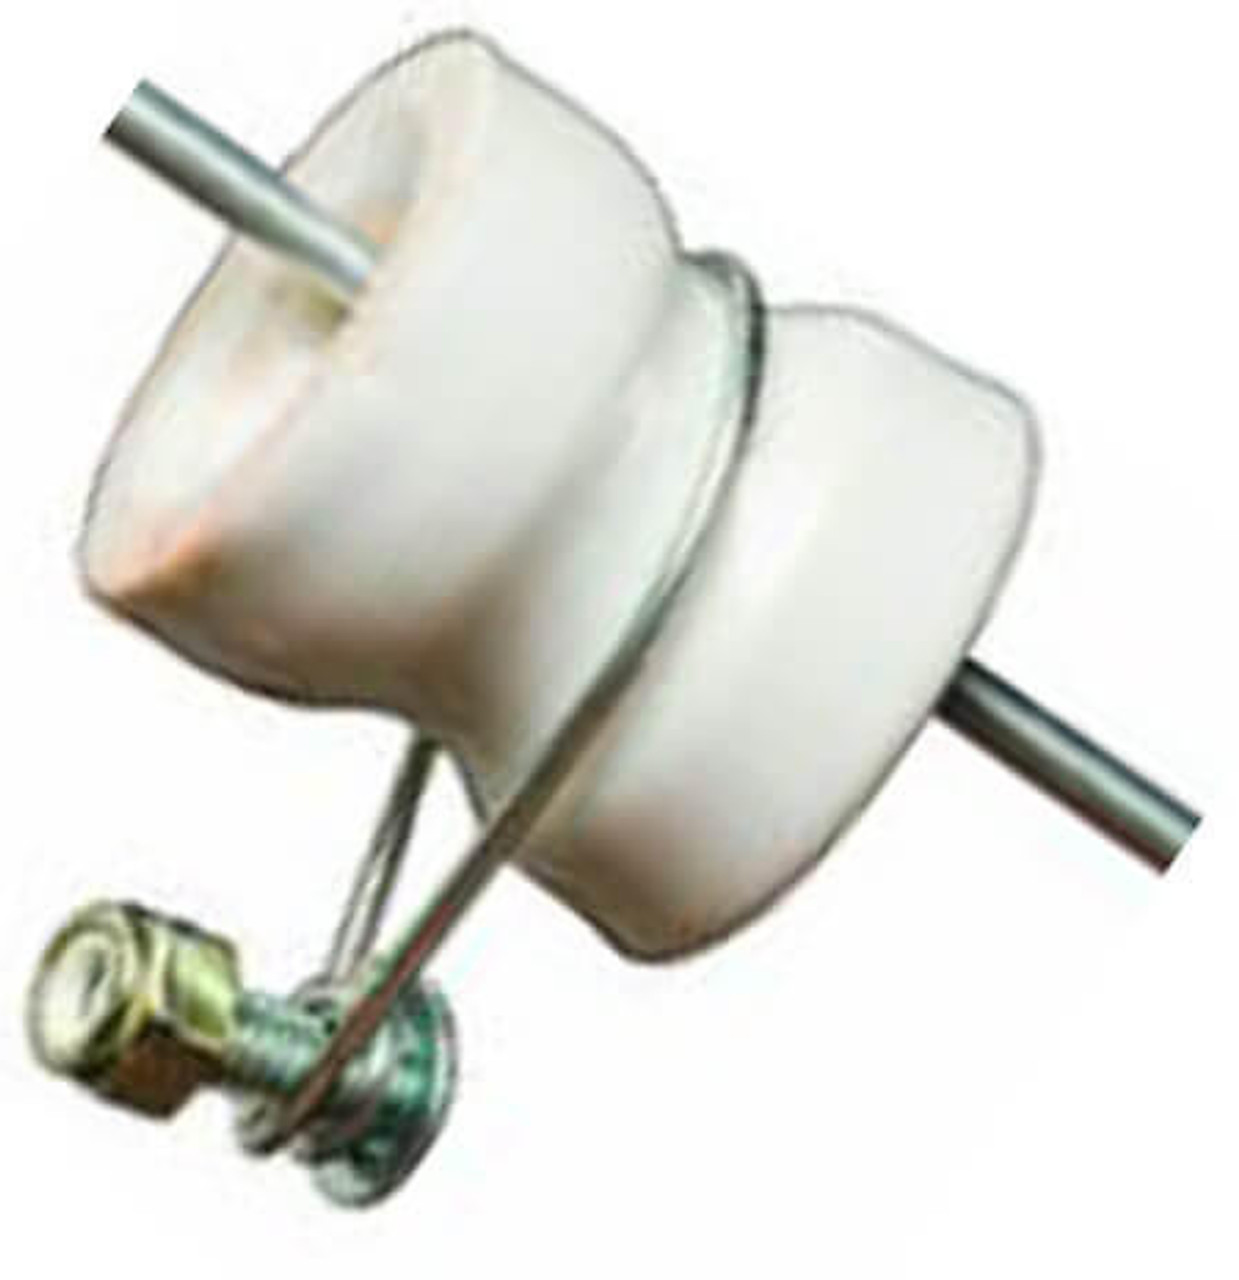 Thunderbird Electric Fence Porcelain Reel and Wire Offset Insulators 50pk EF-31